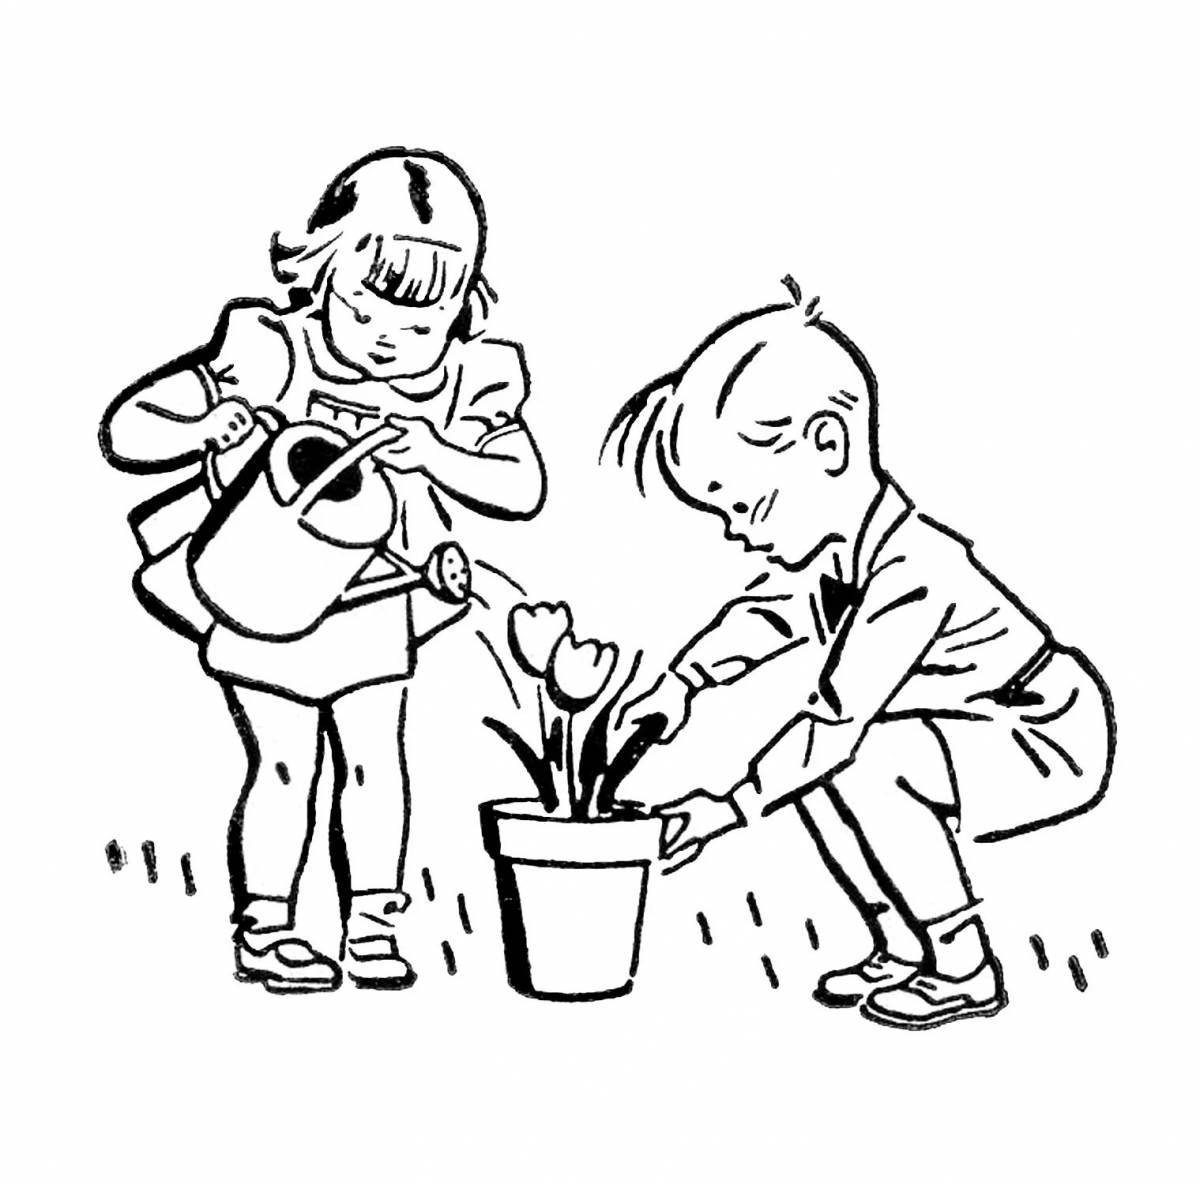 Houseplant care for kids #4